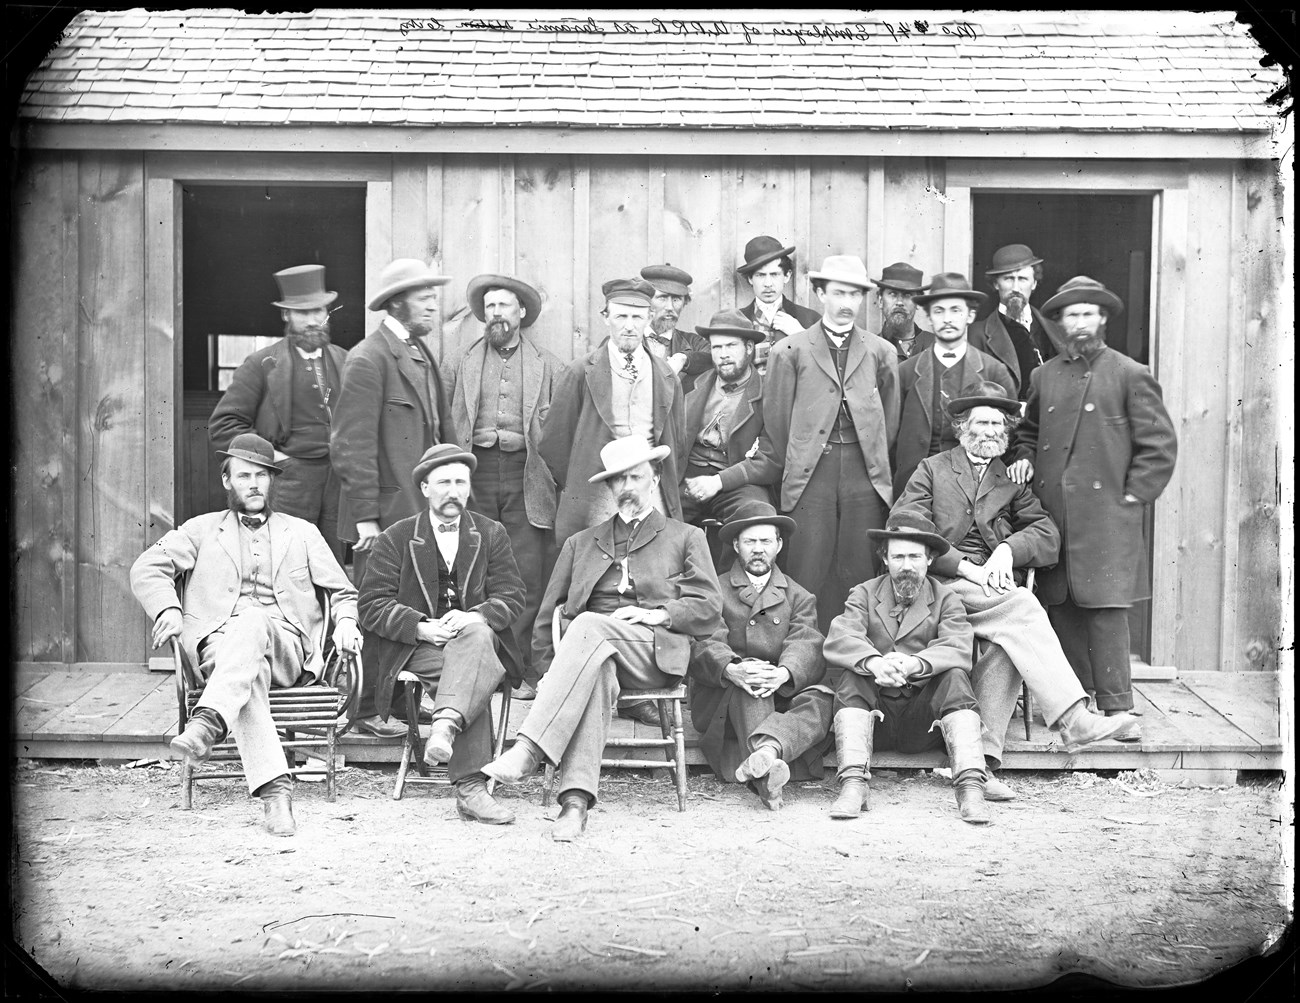 Irish Immigrant railroad workers sitting in front of a railroad station.